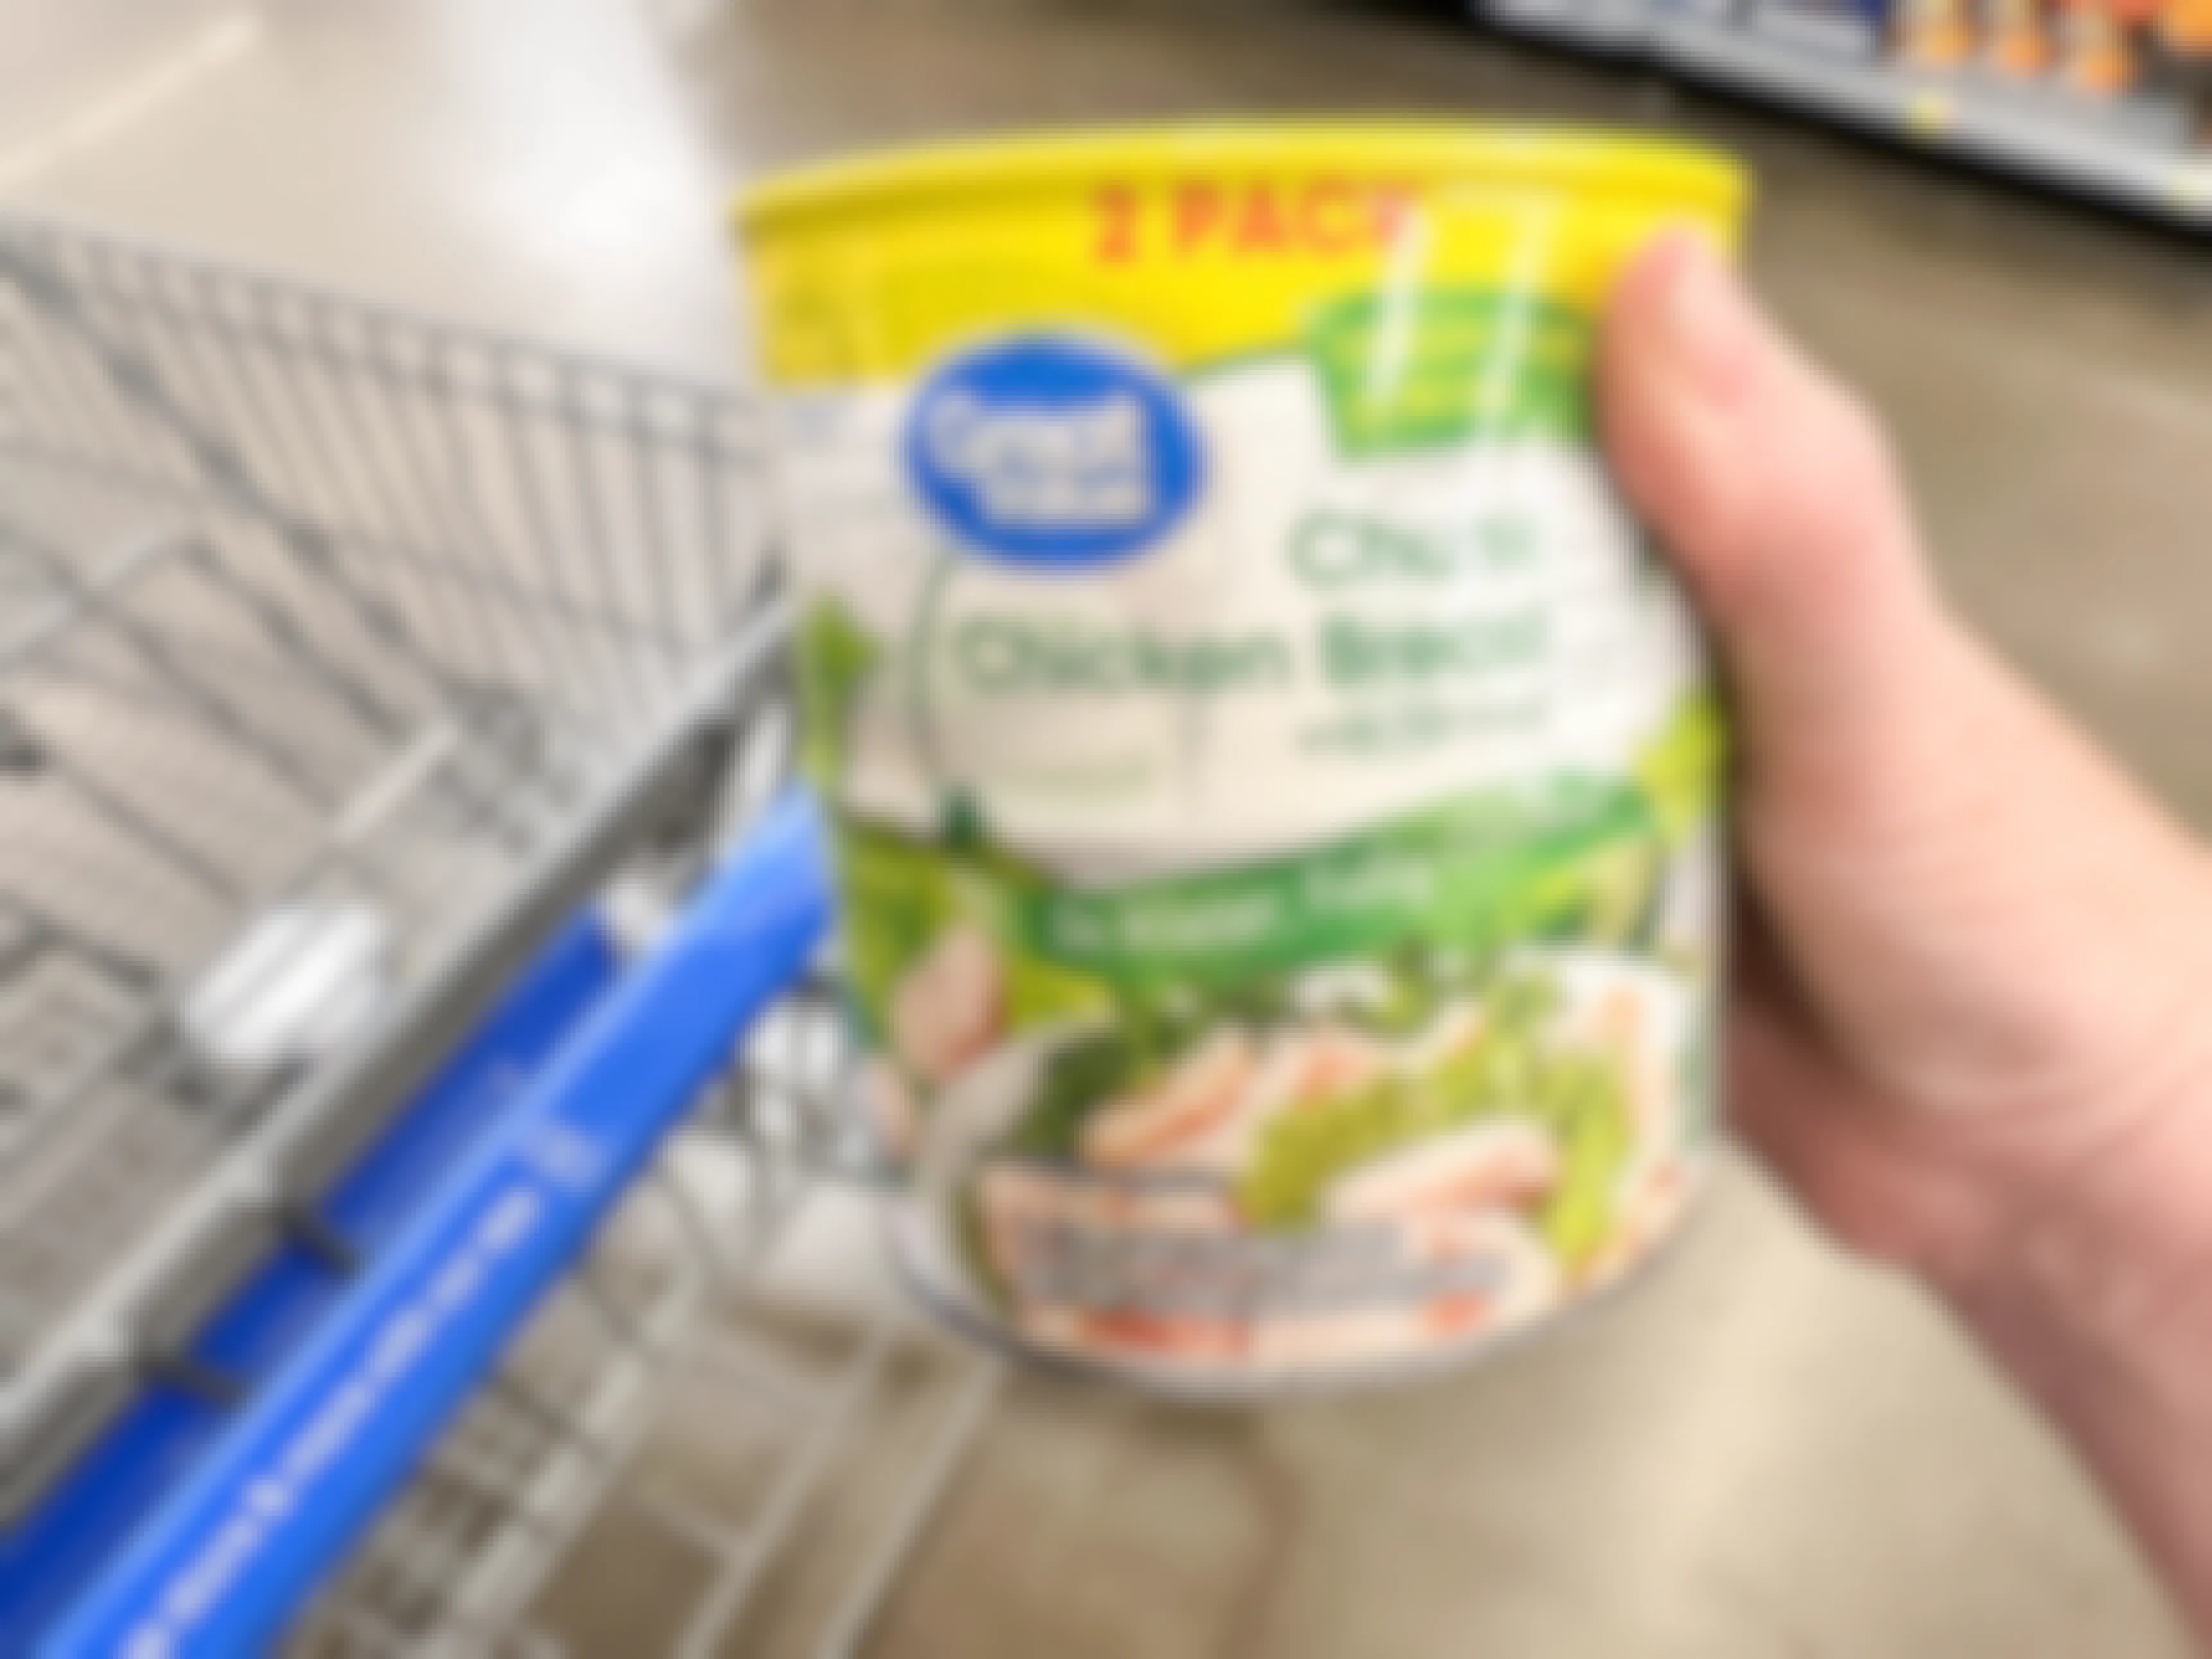 a package of canned chicken breast being held in store 